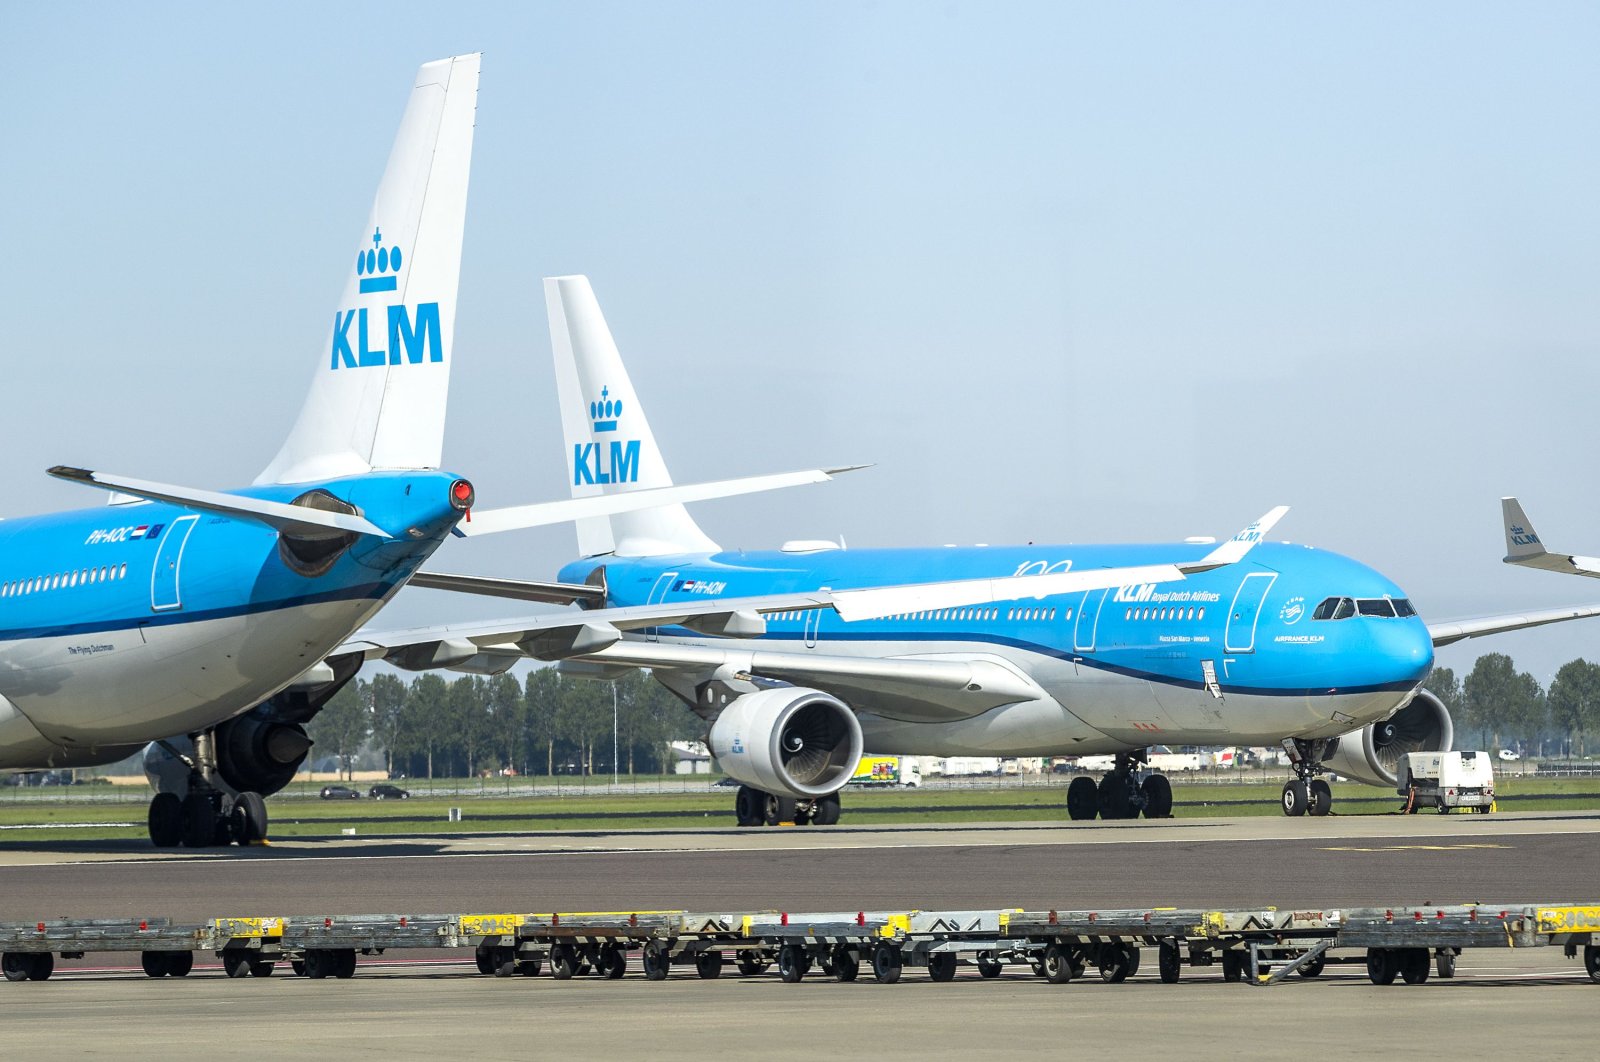 KLM aircraft are seen at a standstill on the tarmac of Schiphol airport, on April 23, 2020, as the country is under lockdown to stop the spread of the Covid-19 pandemic caused by the novel coronavirus. (AFP Photo)